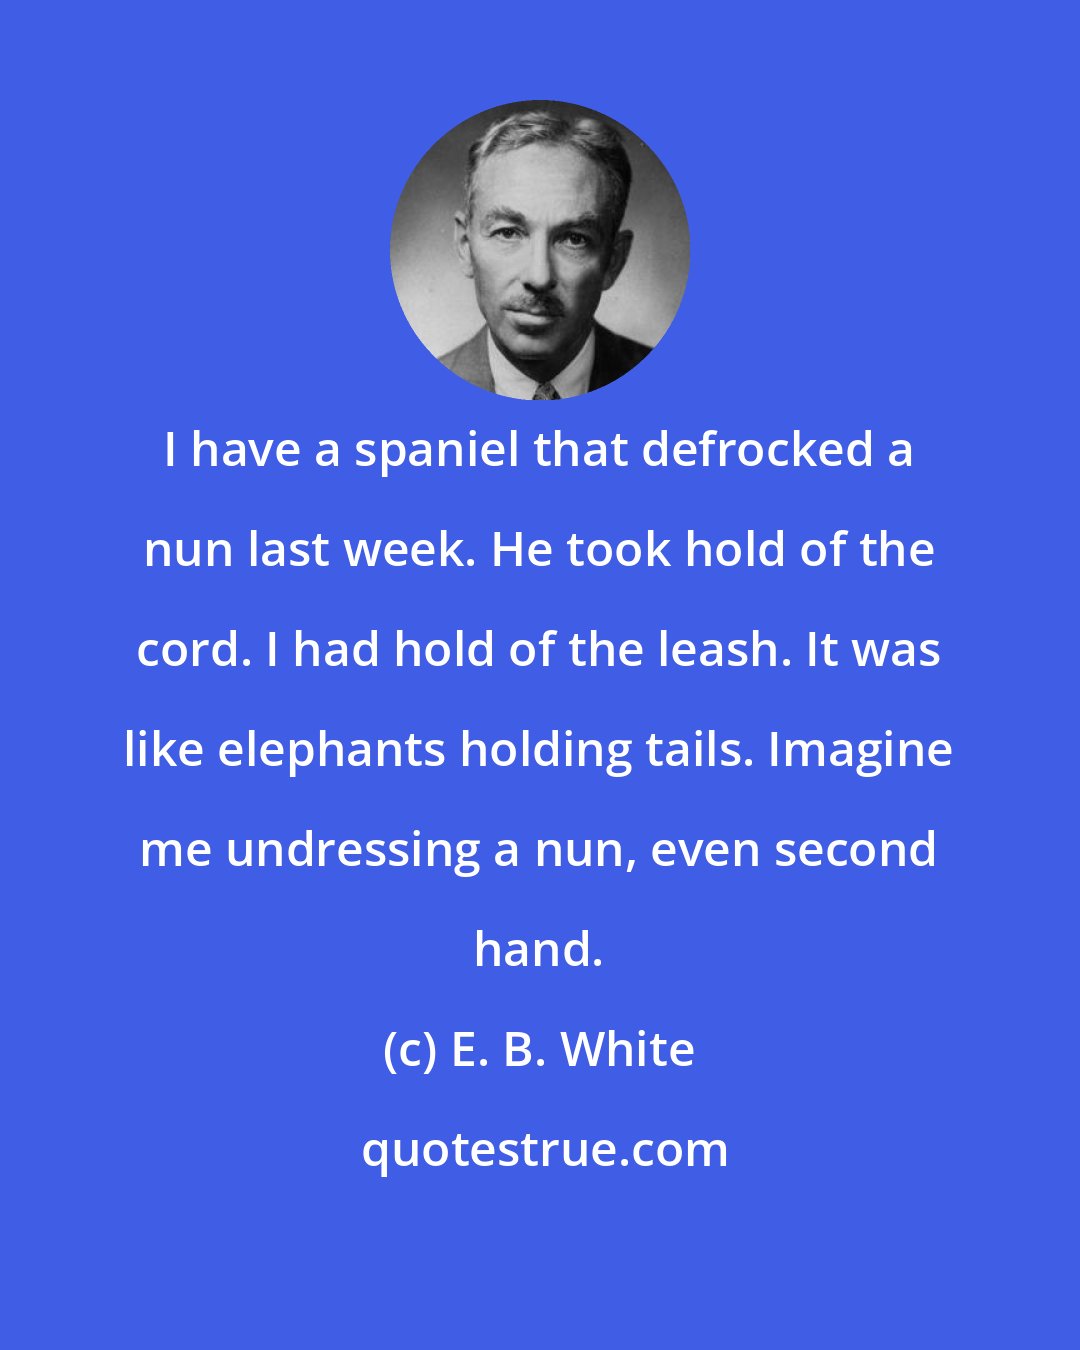 E. B. White: I have a spaniel that defrocked a nun last week. He took hold of the cord. I had hold of the leash. It was like elephants holding tails. Imagine me undressing a nun, even second hand.